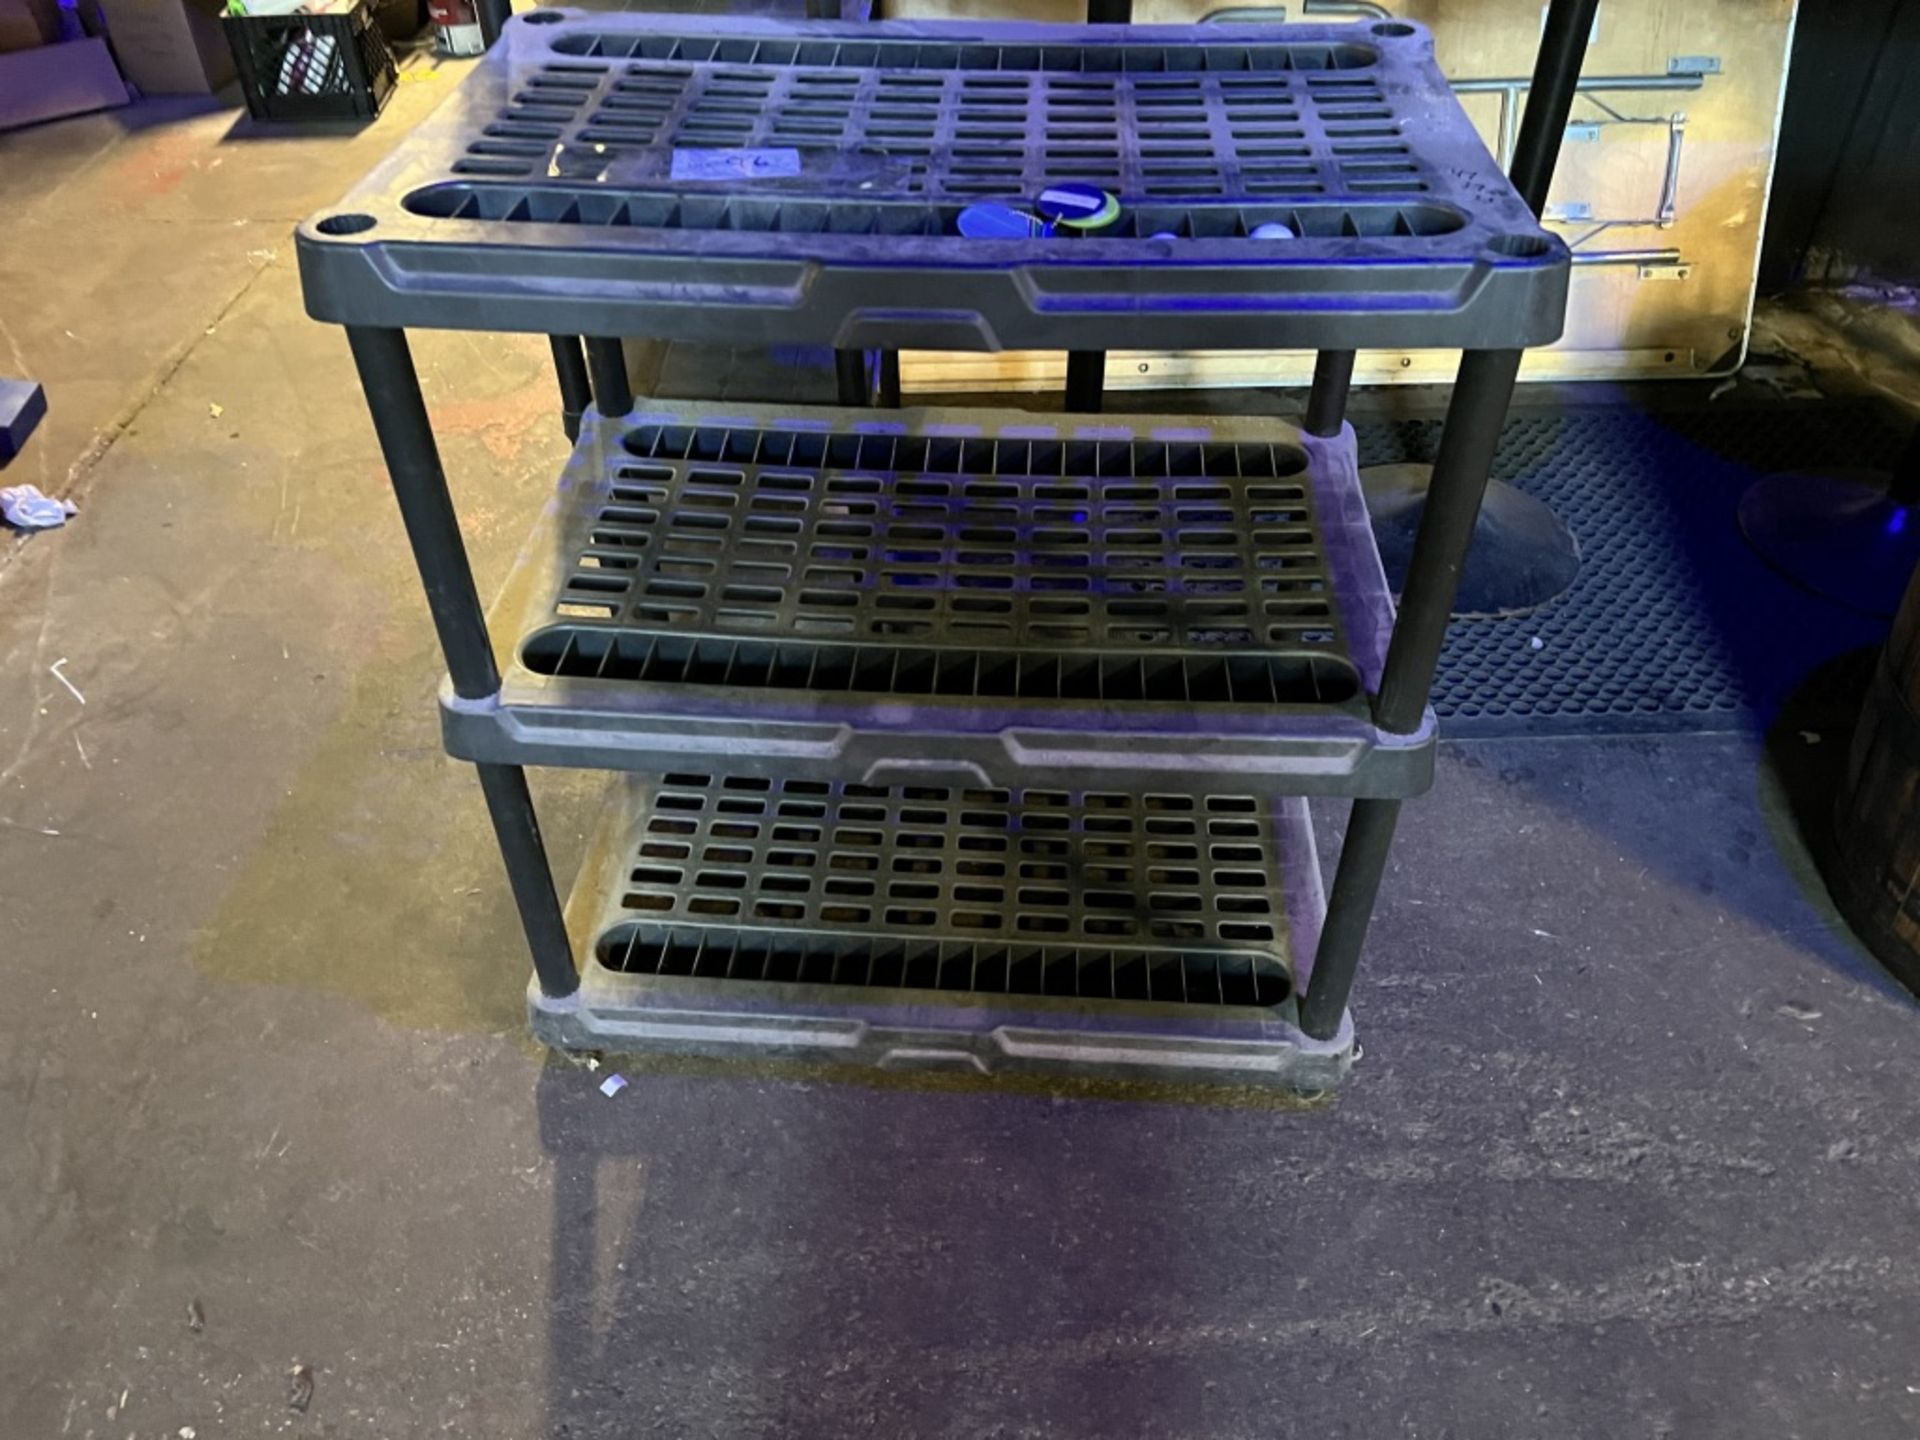 LOT OF: (1) 28" 5-TIER PLASTIC SHELVING UNIT, AND (1) 35" WIDE 3-TIER PLASTIC SHELVING - Image 5 of 5